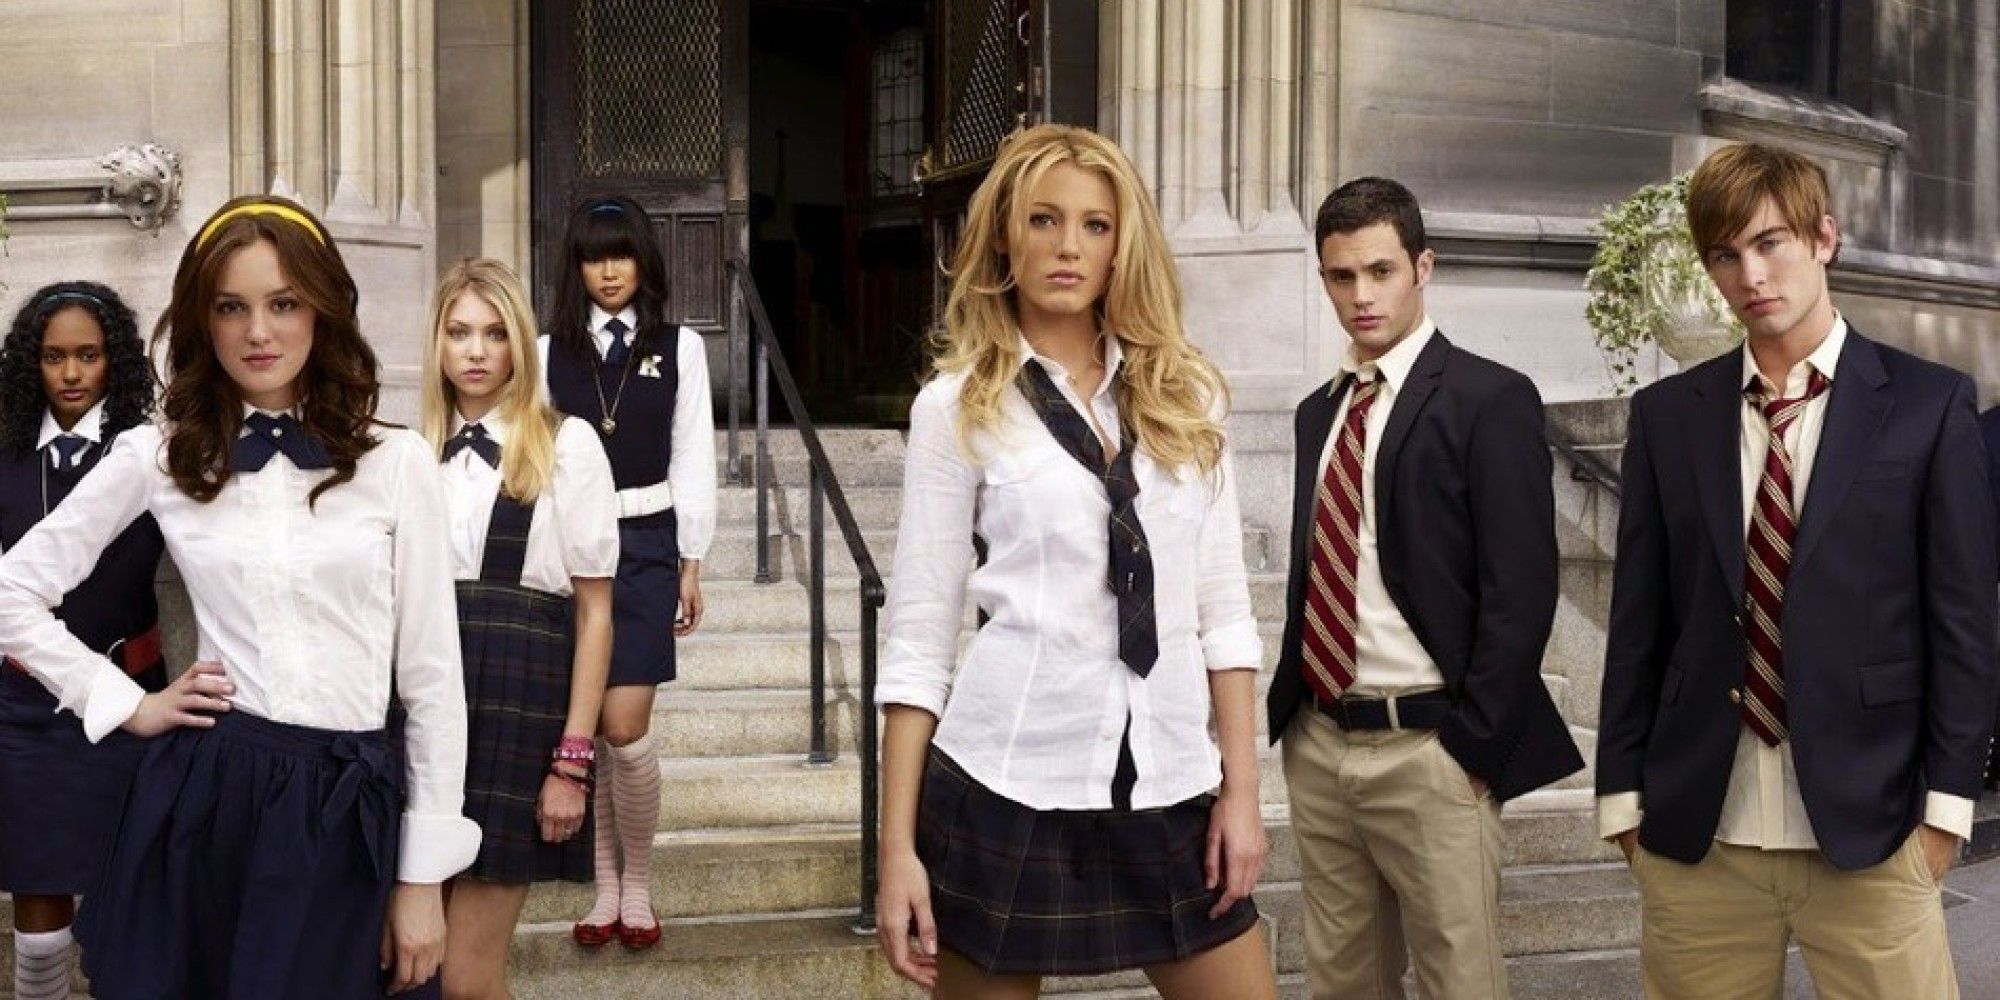 Promo image of the cast for Gossip Girl